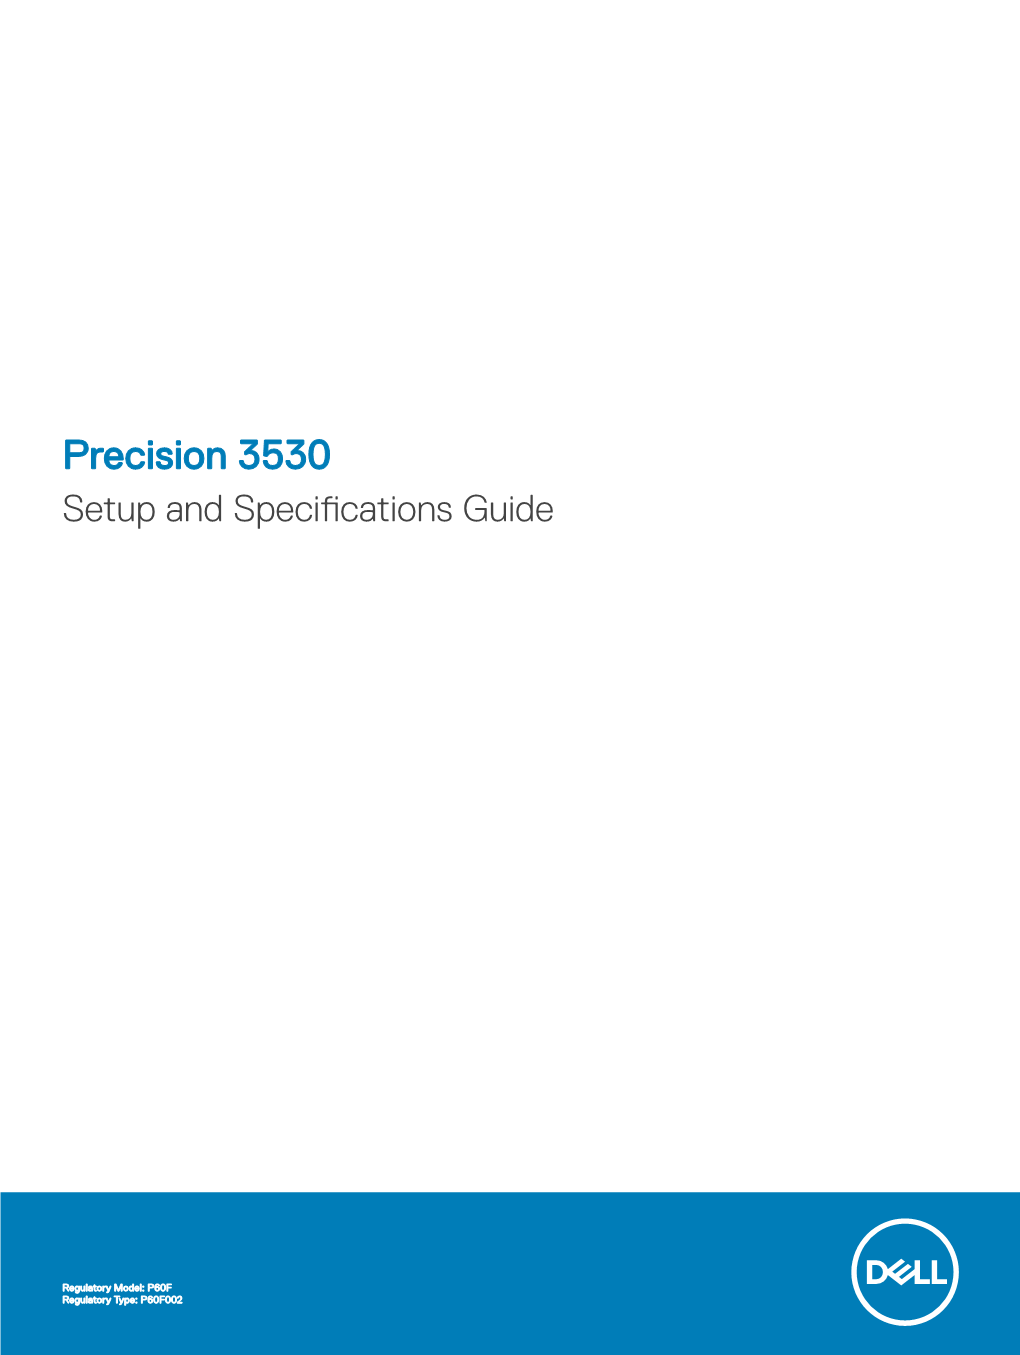 Precision 3530 Setup and Specifications Guide